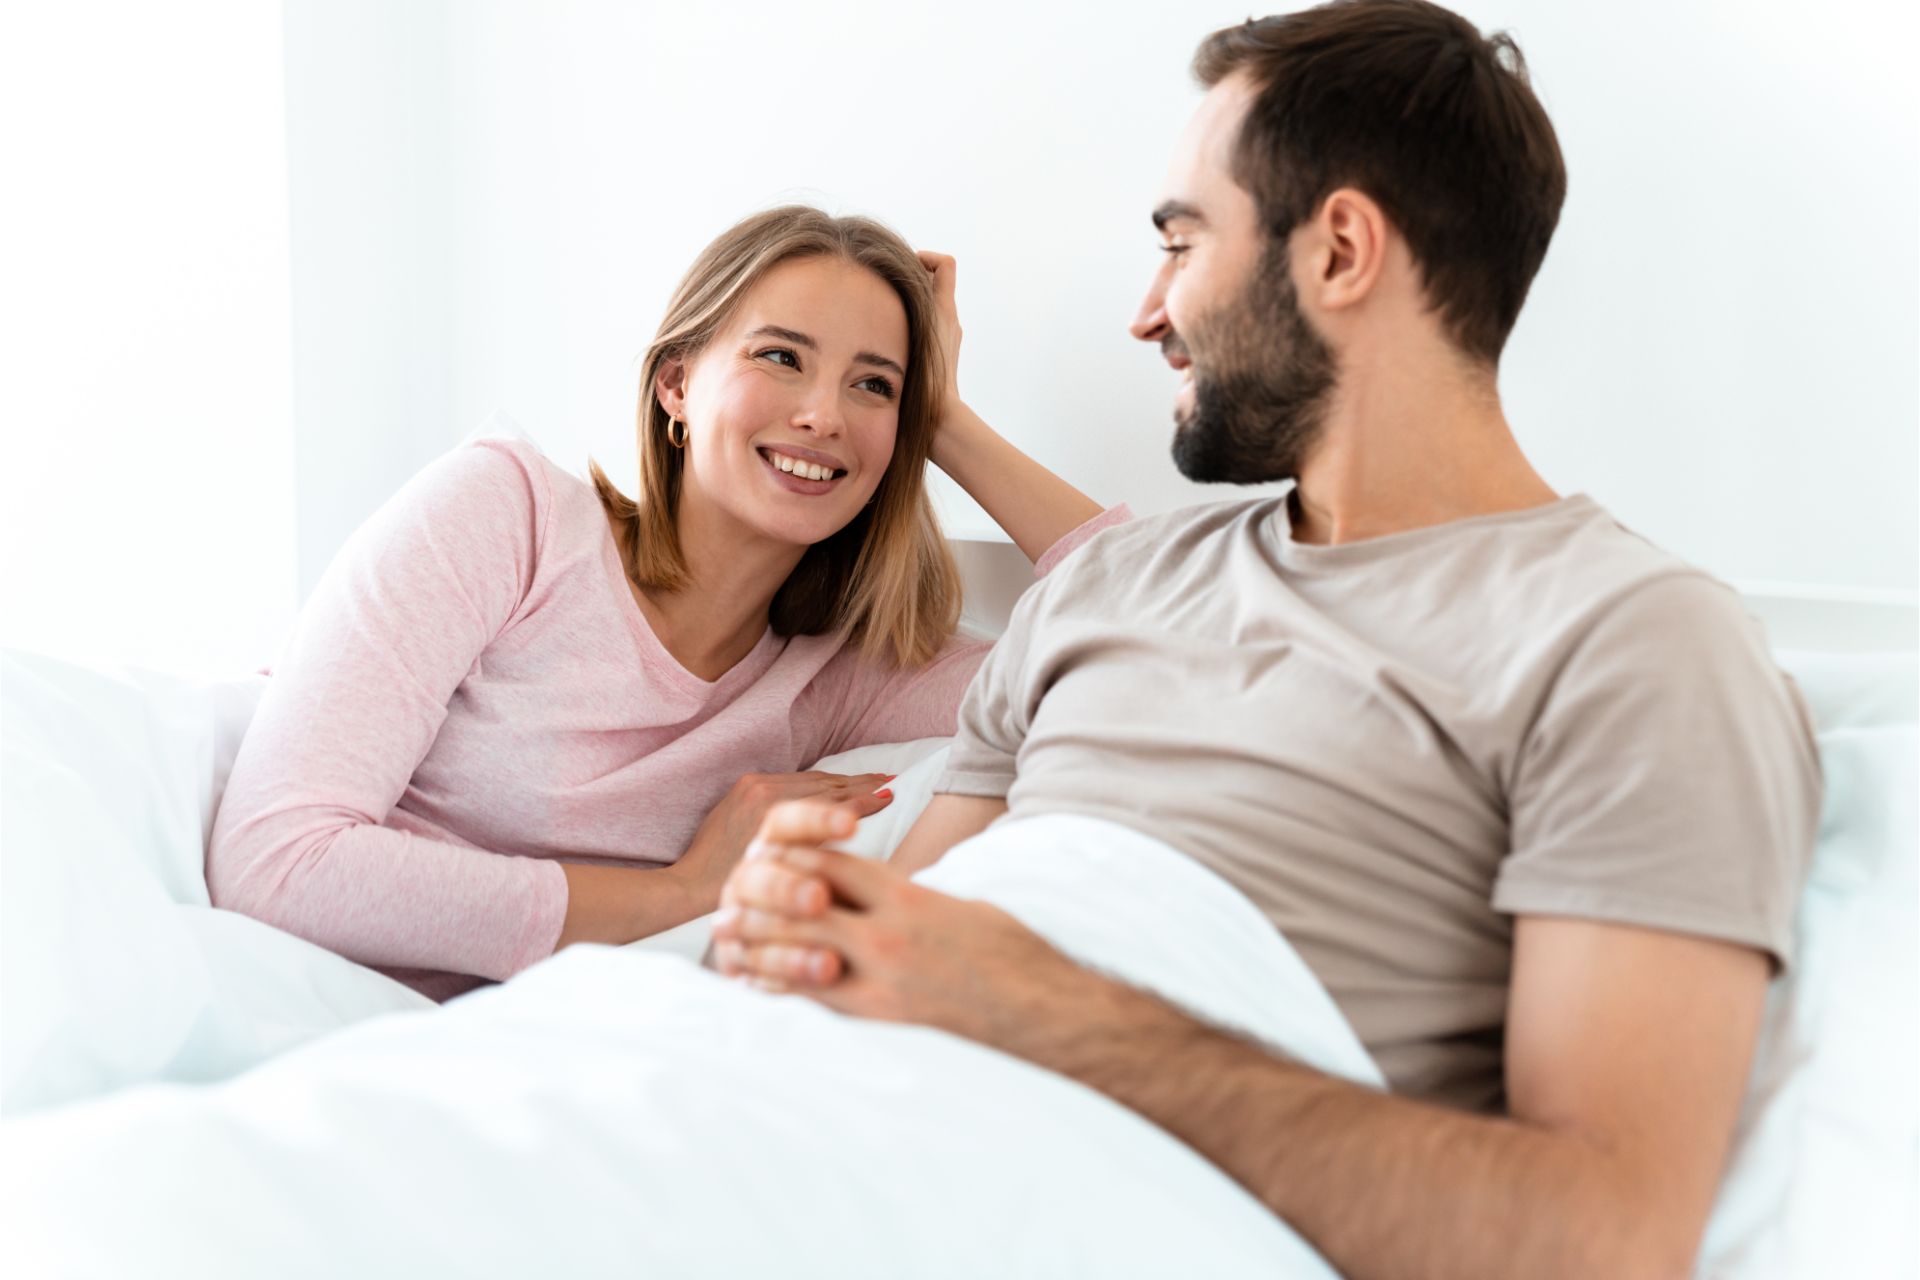 deep conversation starters for couples